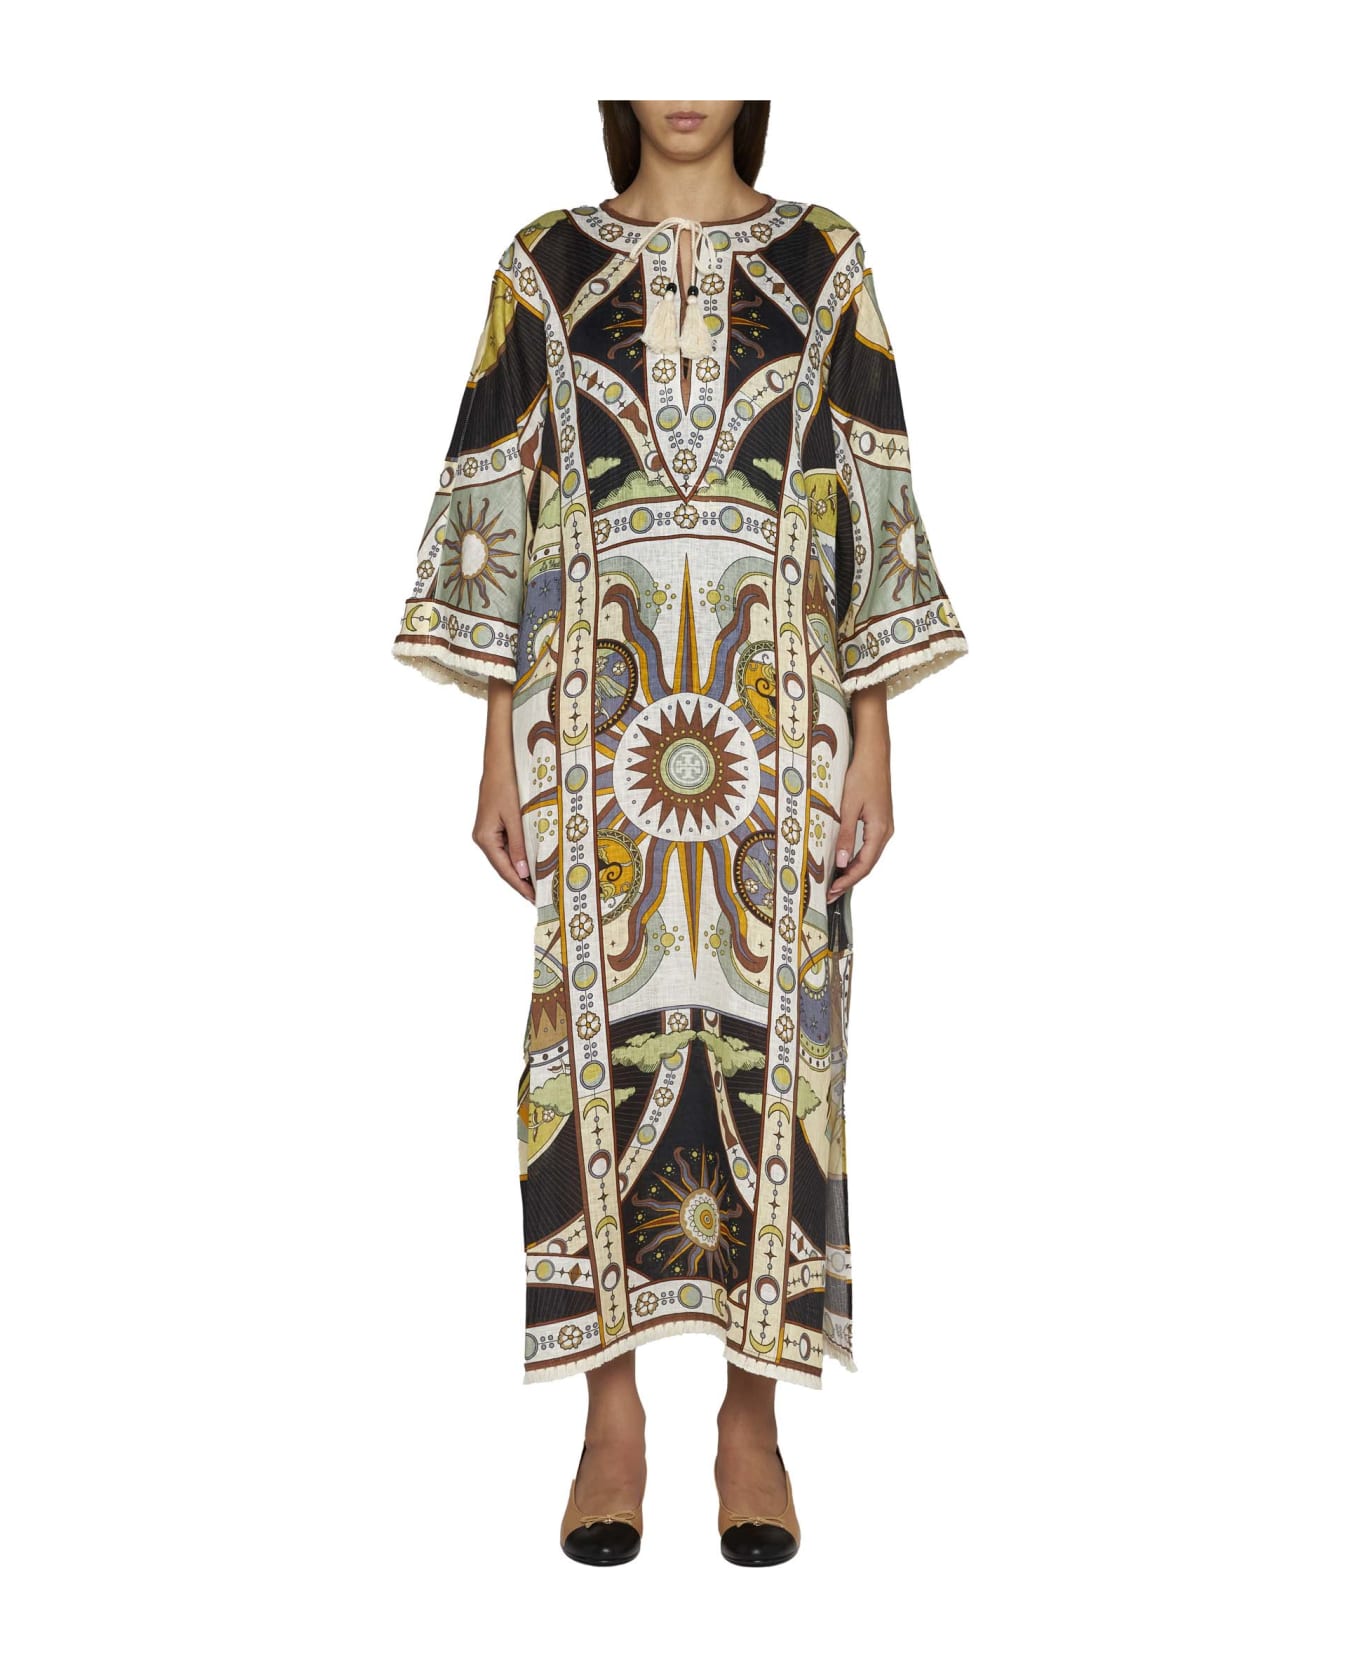 Tory Burch Kaftan With All-over Graphic Print In Linen - Navy sundial ワンピース＆ドレス